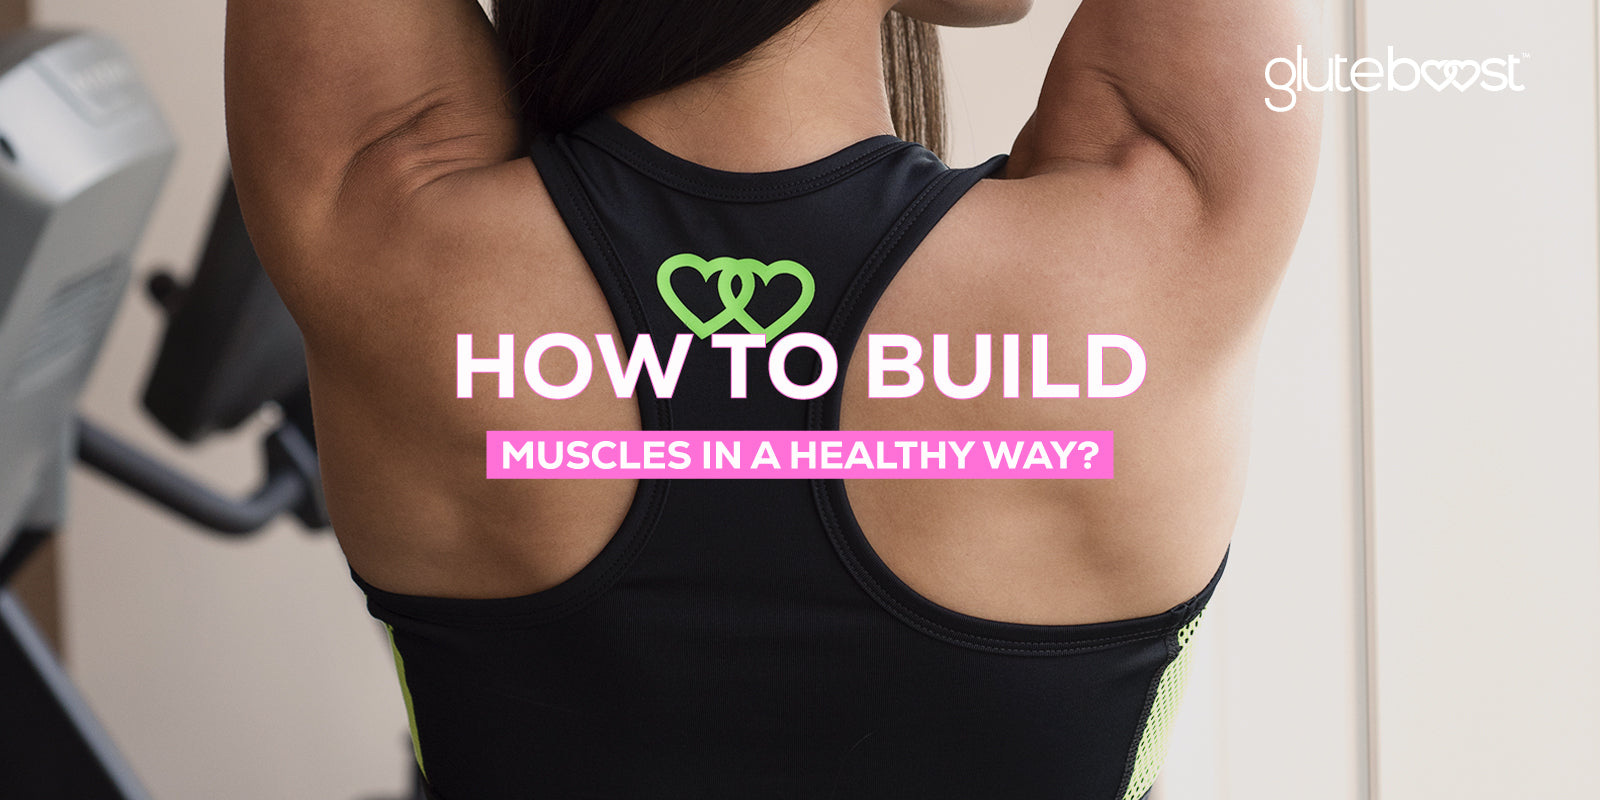 How to build muscles in a healthy way